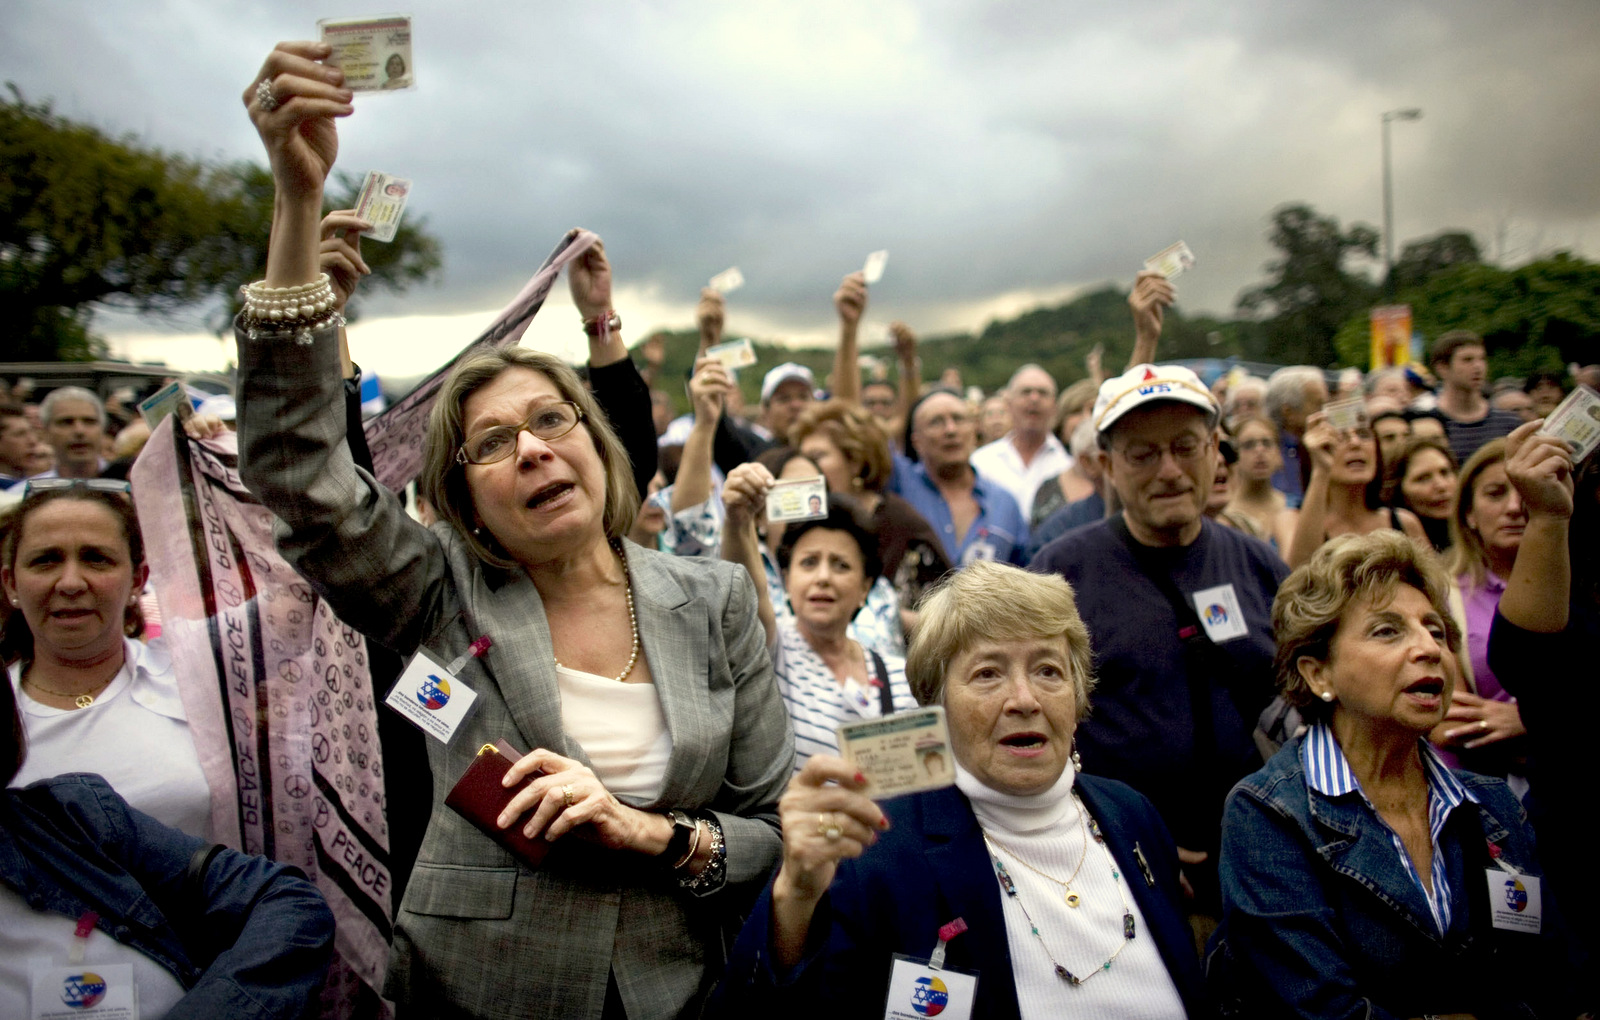  In this Feb. 2009 photo, Venezuelans hold up their ID cards during a protest against anti-semitism outside a synagogue in Caracas, Venezuela following outrage at the 2009 Israeli war on the Gaza Strip. (AP/Ariana Cubillos)